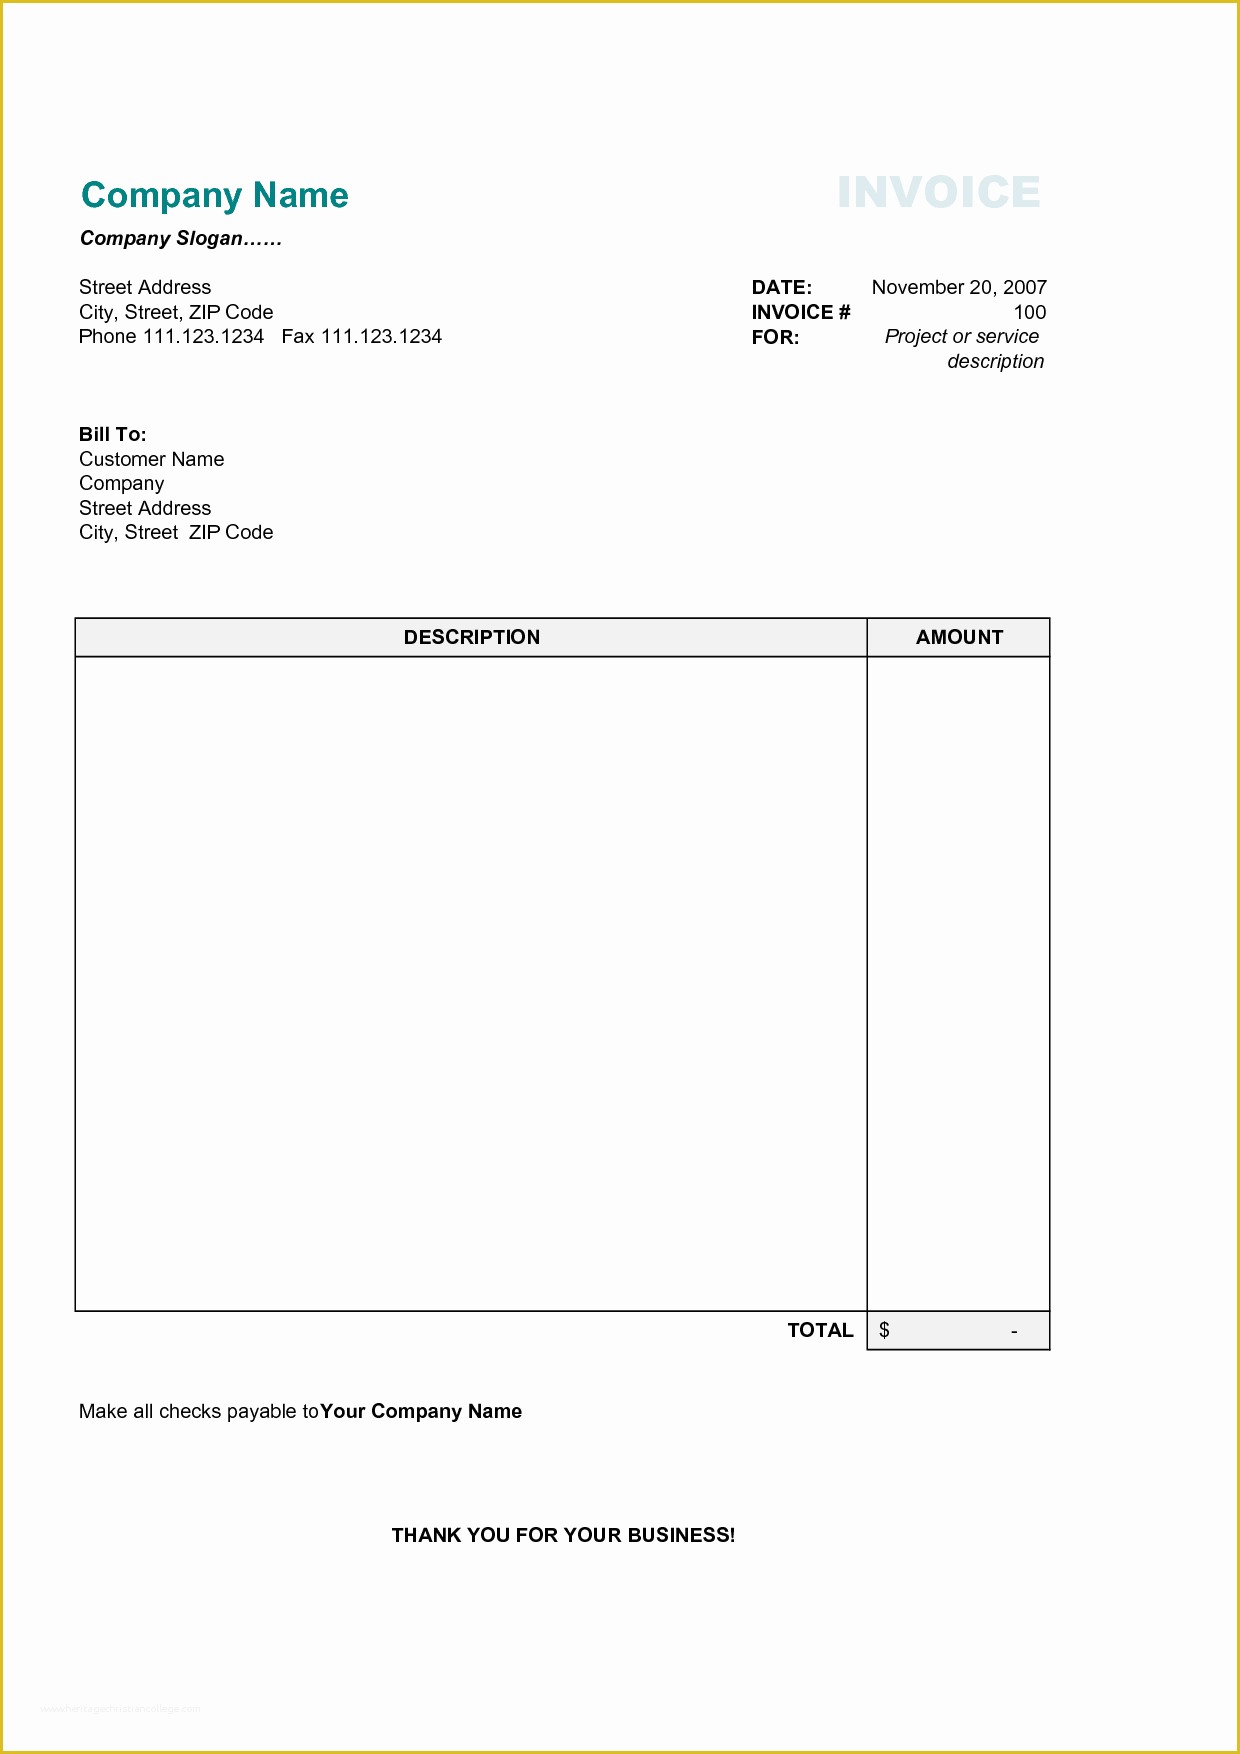 Free Printable Business Invoice Template Of Invoice Template Category Page 1 Efoza